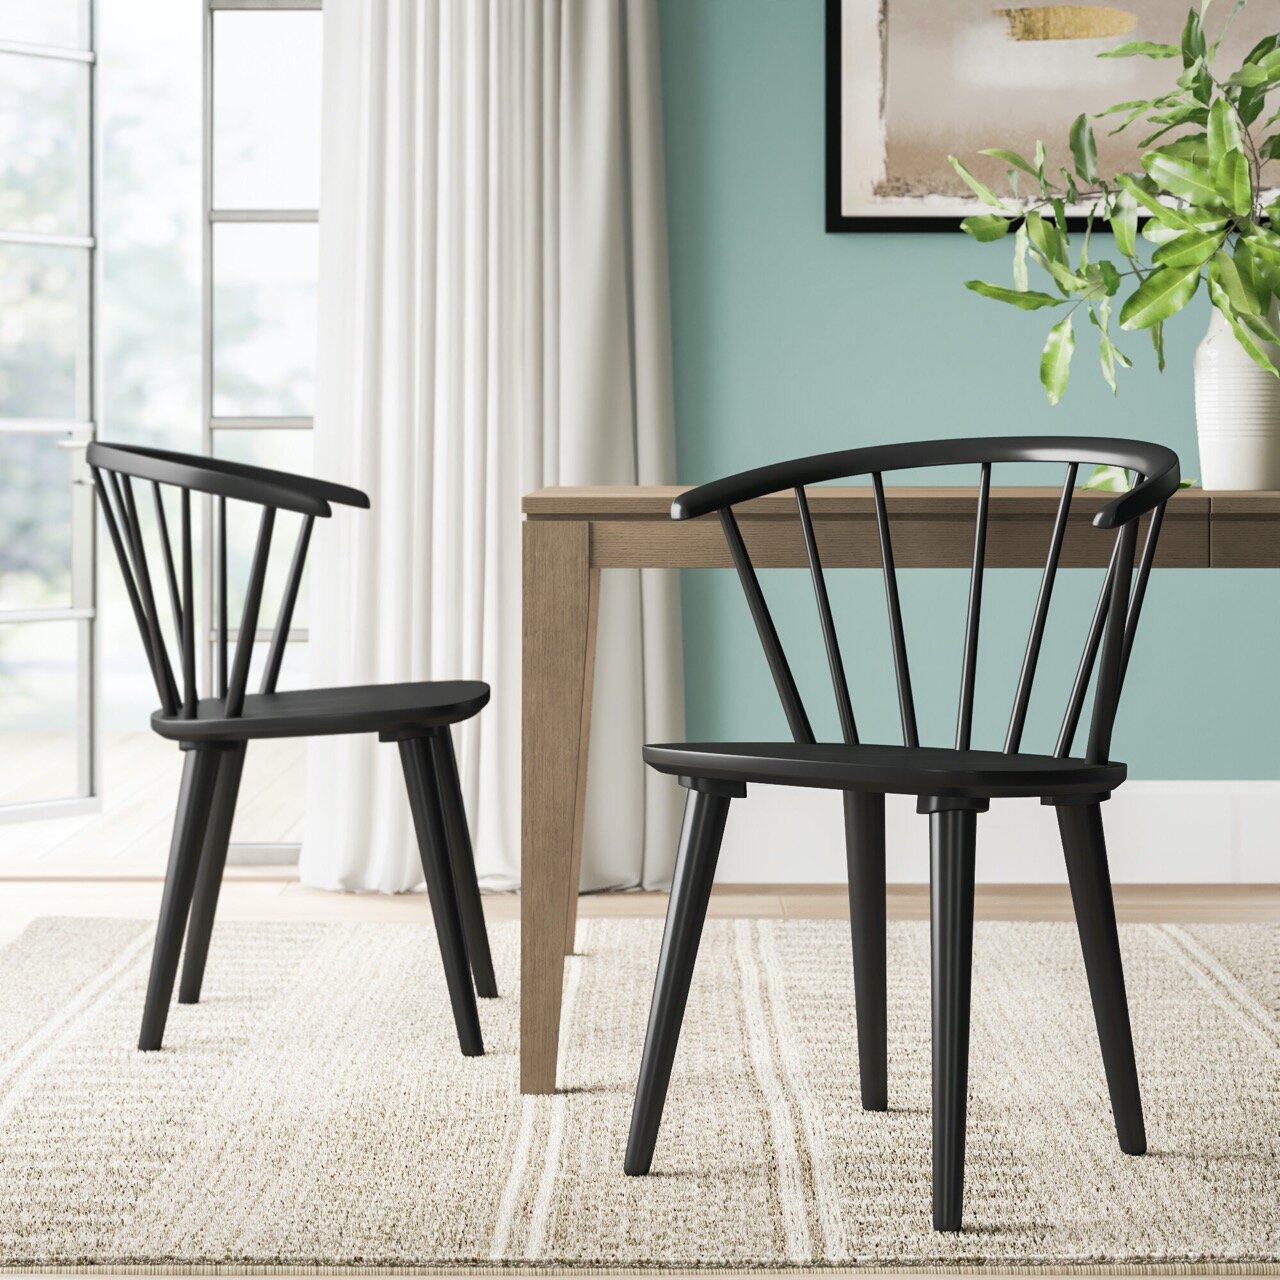 Top Picks: Dining Chairs